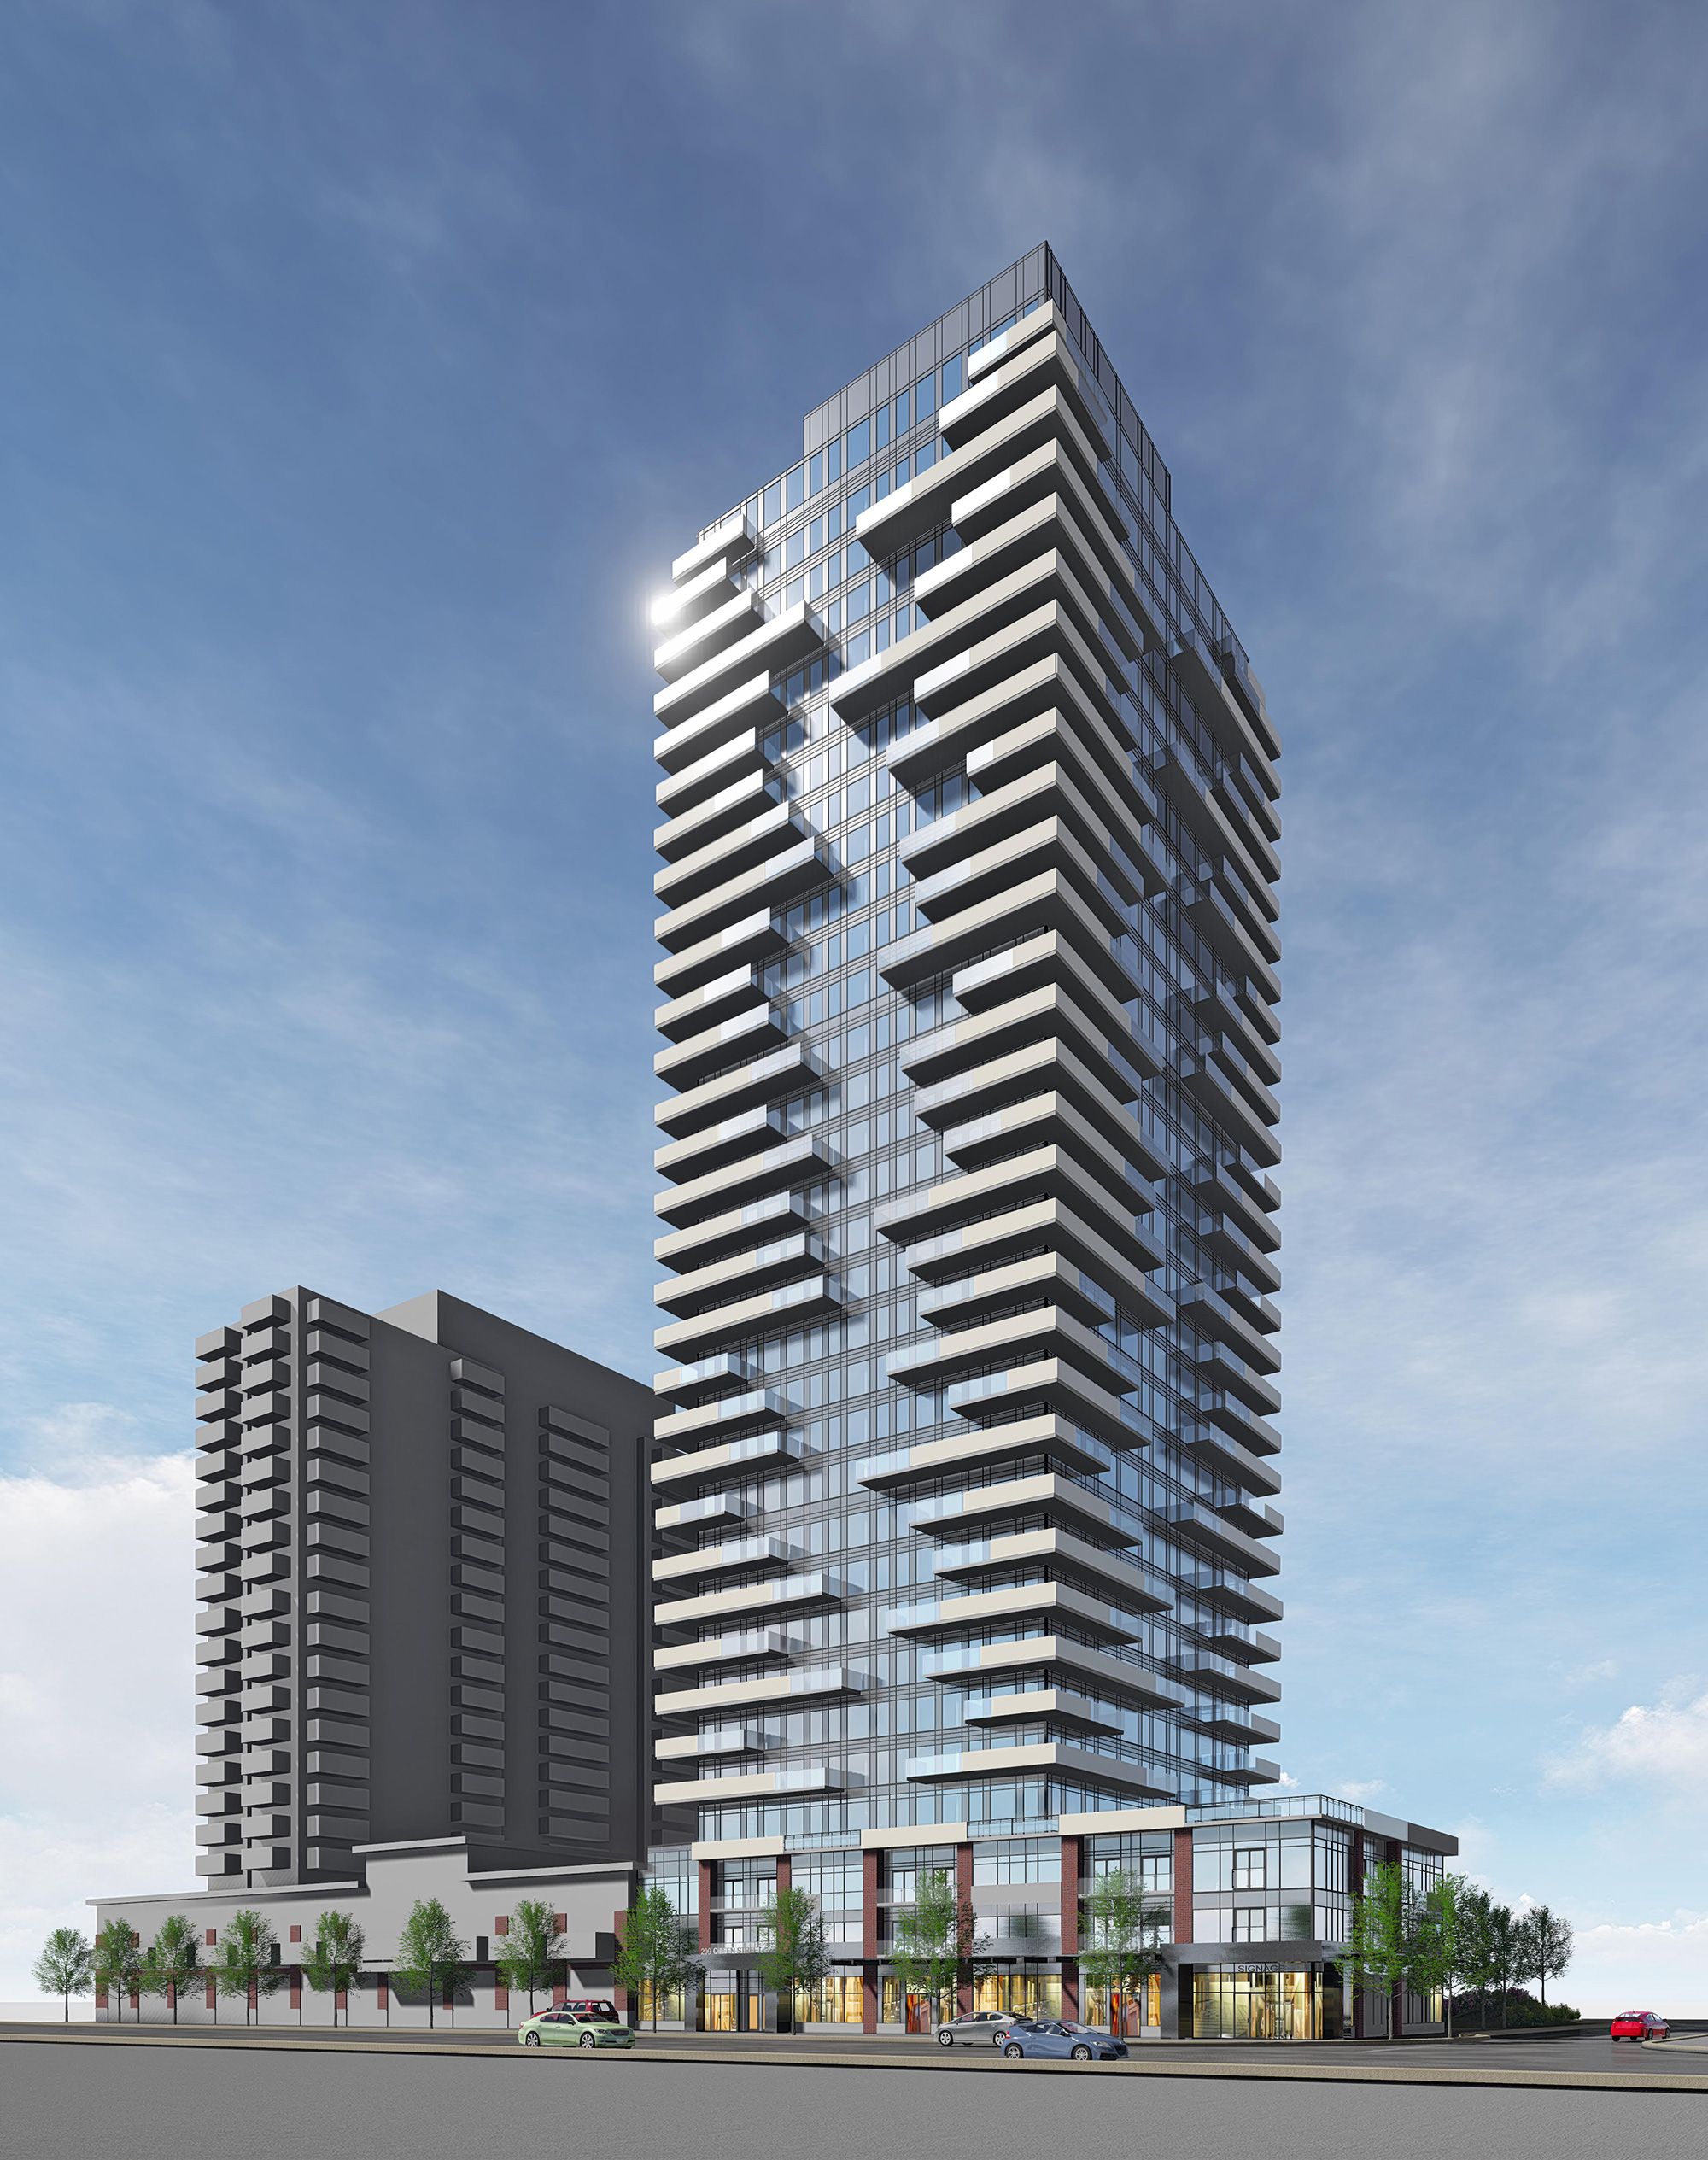 31 storey, 272 unit rental building with 3 levels of underground parking.